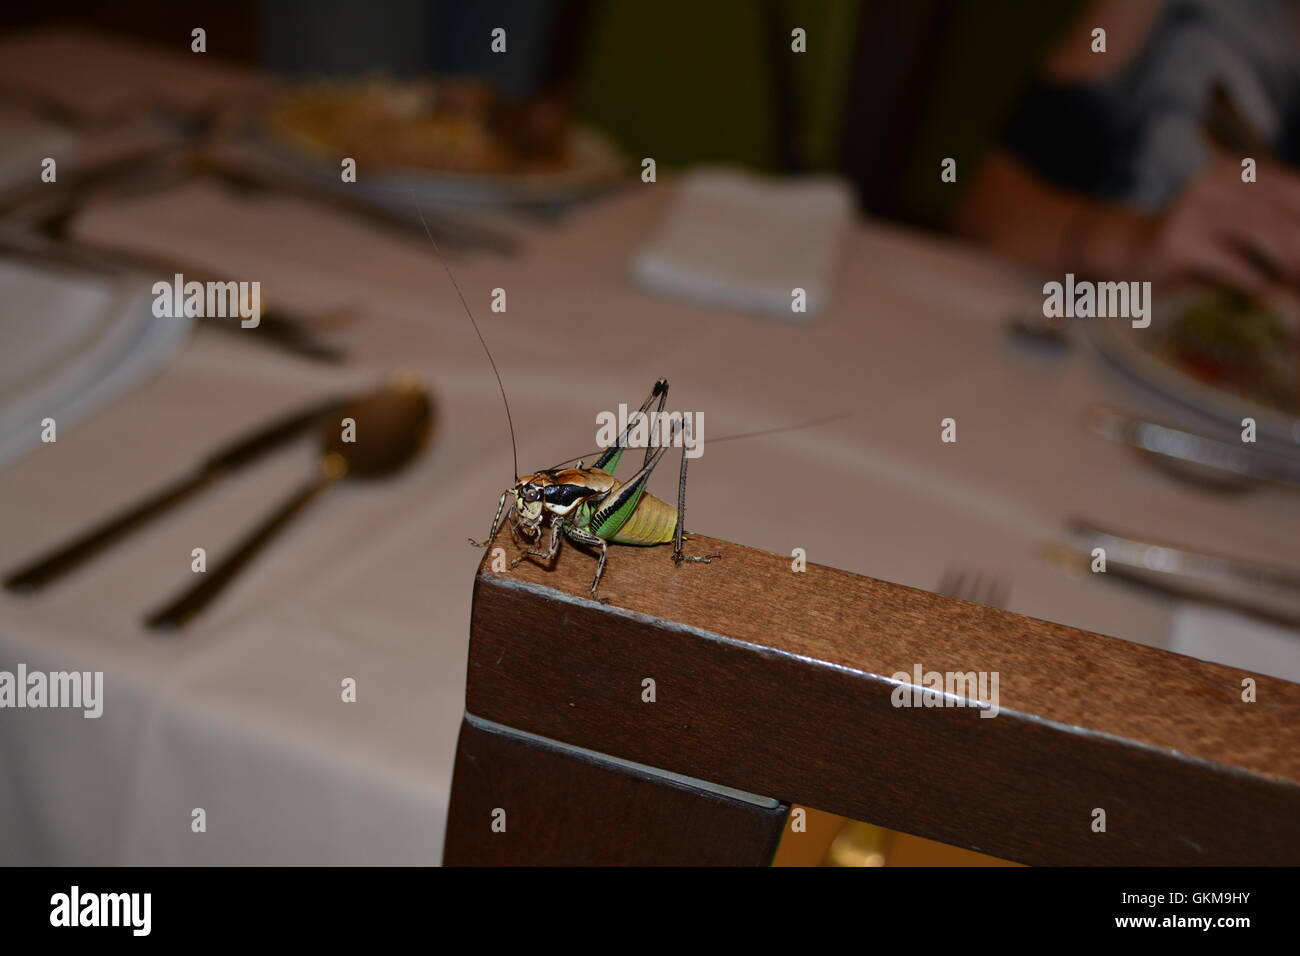 Cricket Bug. Close up on a colorful cicada. Cricket bug eating on a wooden chair back near a dining table. Stock Photo